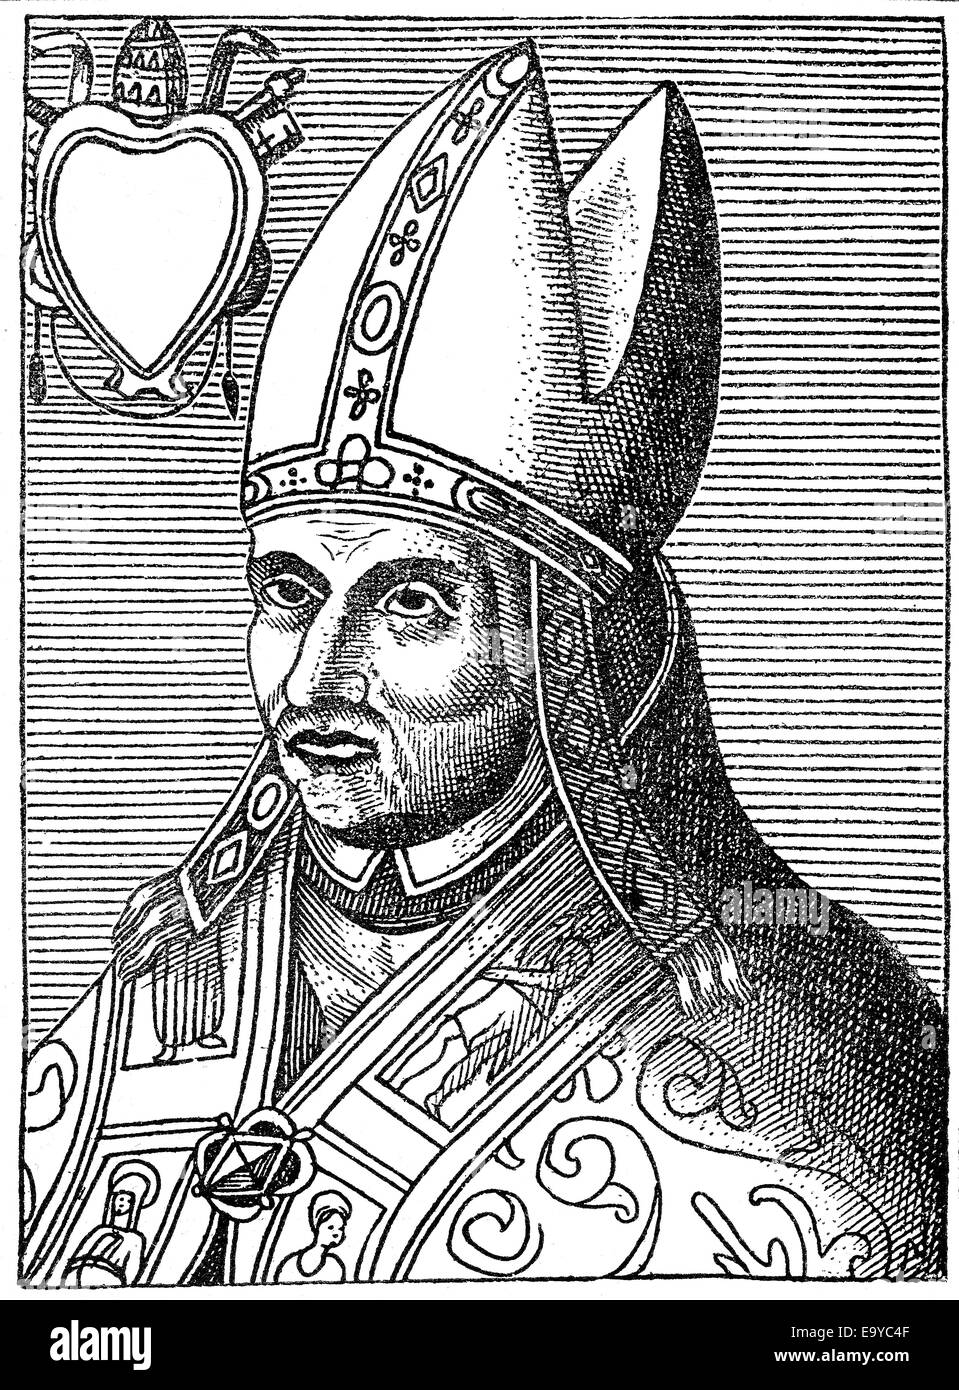 Pope Sylvester II or Silvester II, Born Gerbert d'Aurillac, Gerbert of Aurillac, c. 946 - 1003, Pope from 999 to 1003, Papst Sil Stock Photo